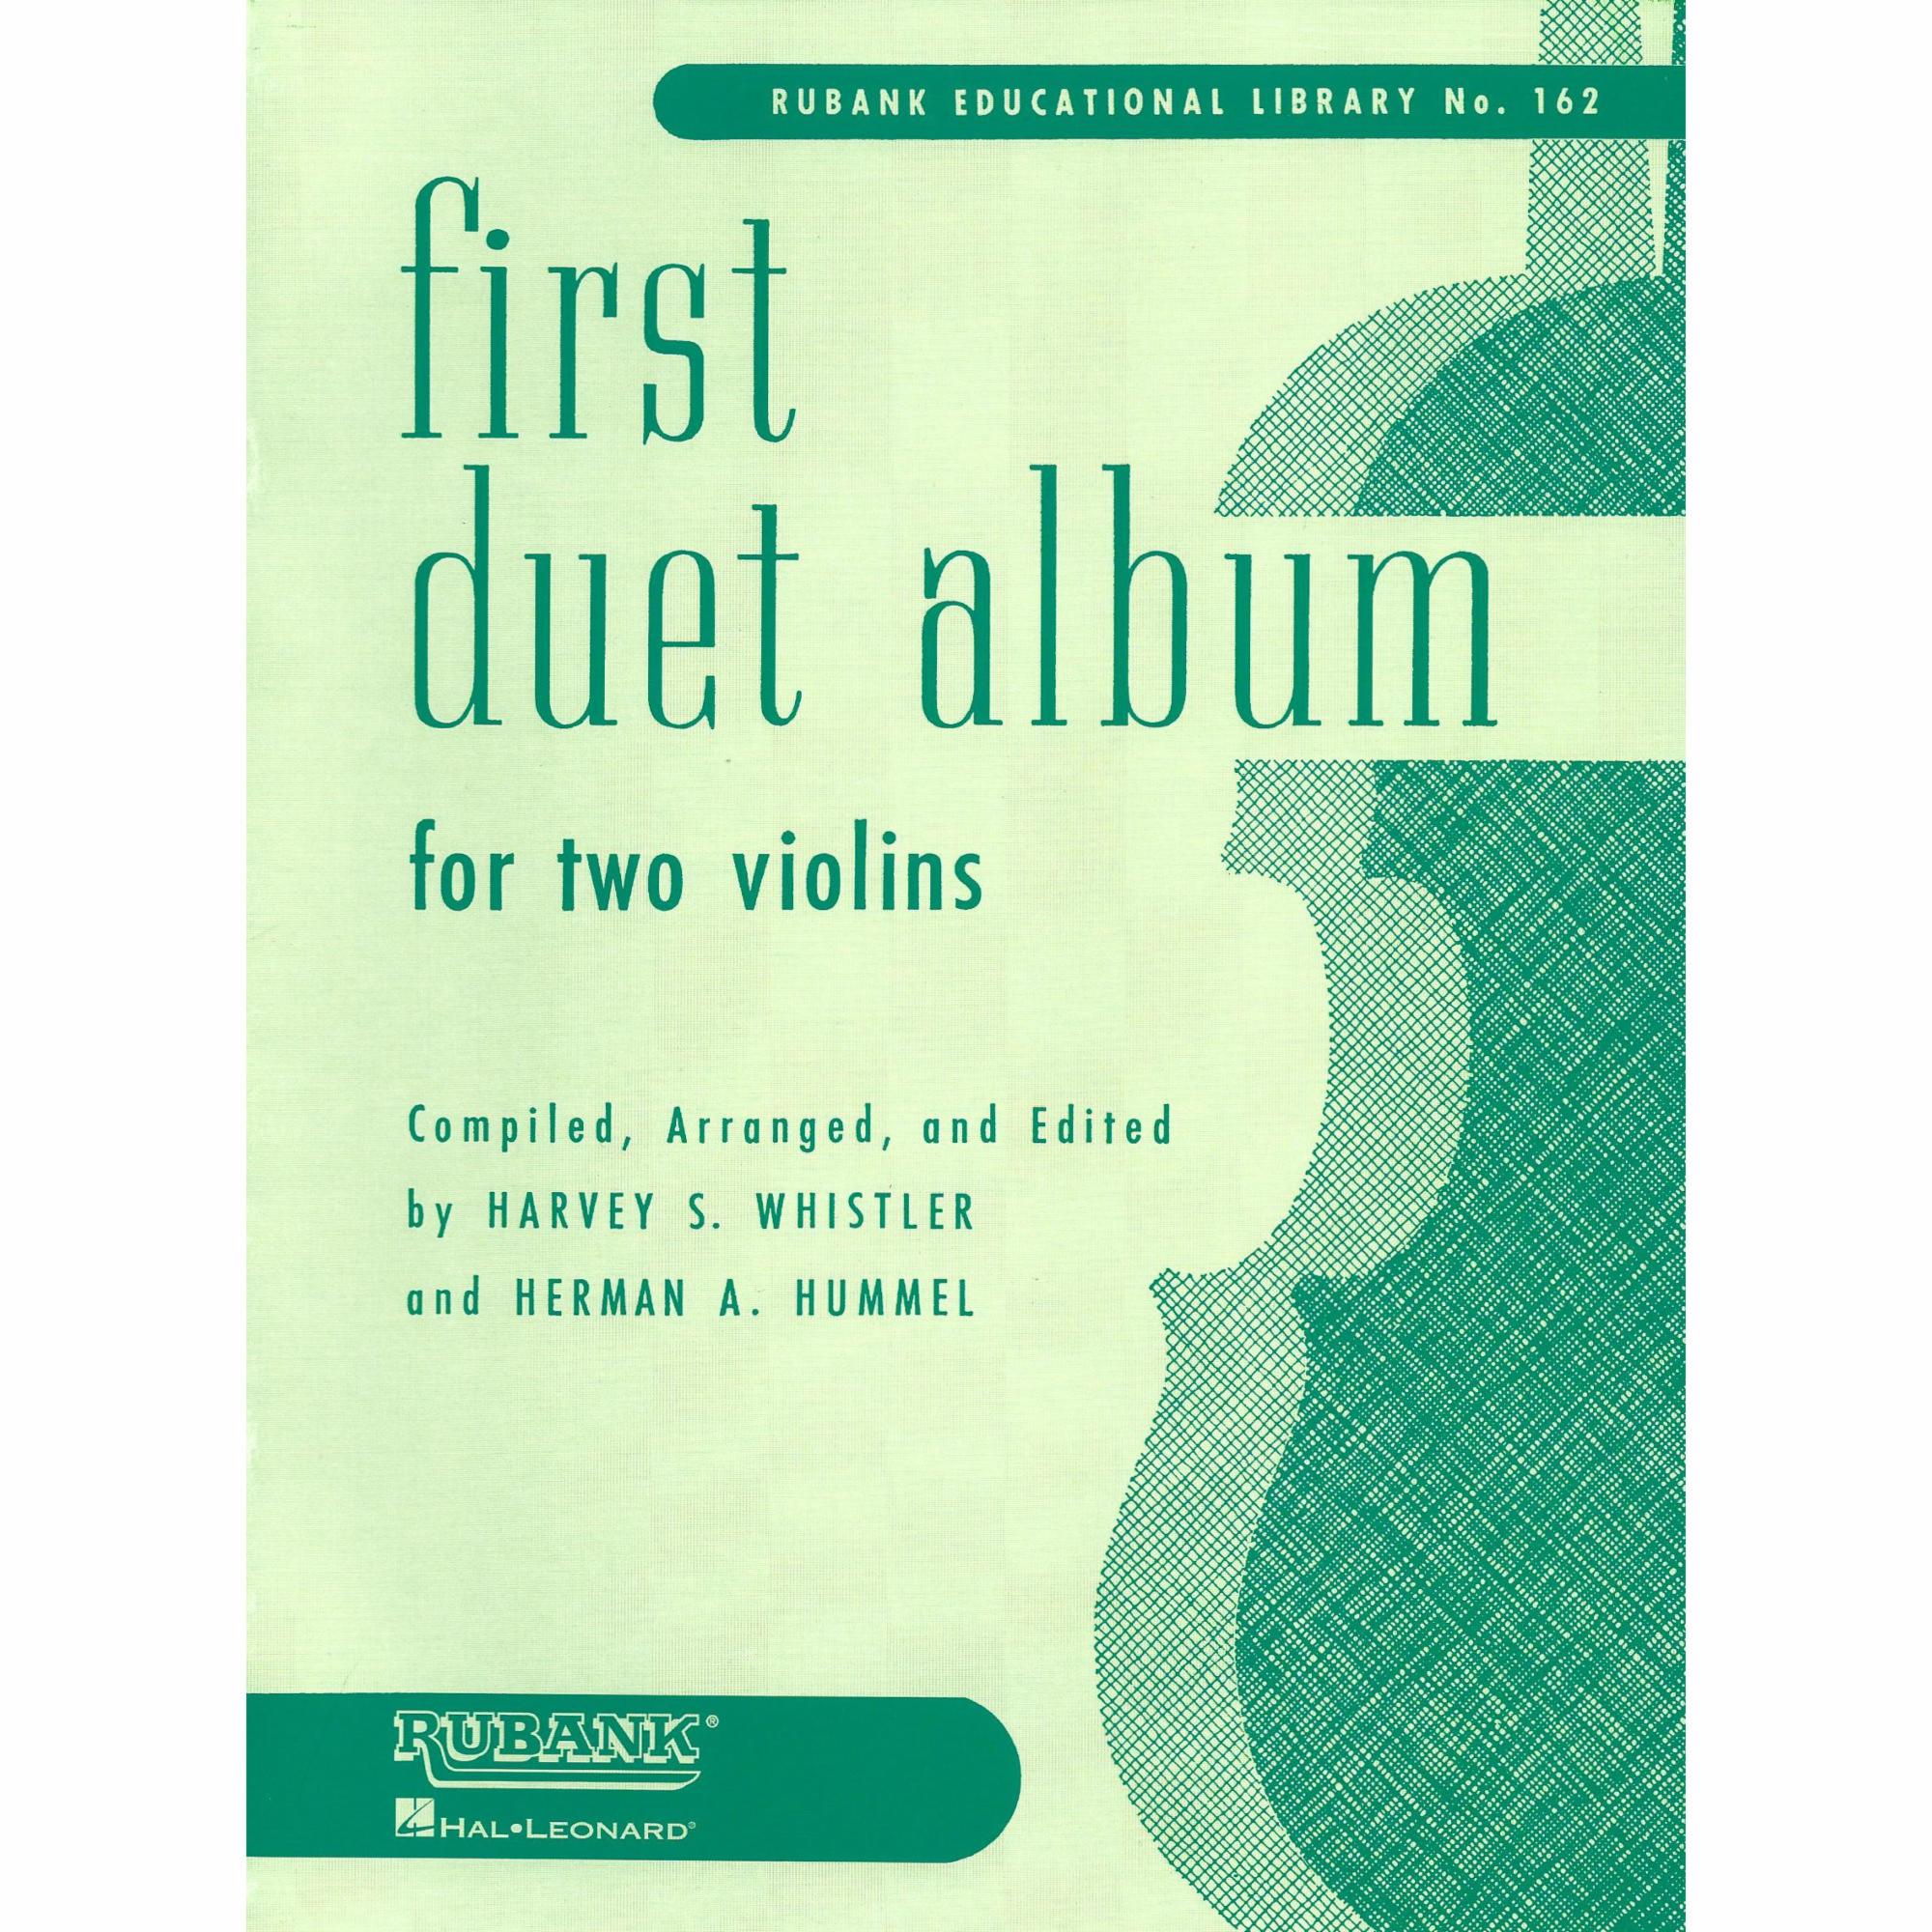 First Duet Album for Two Violins